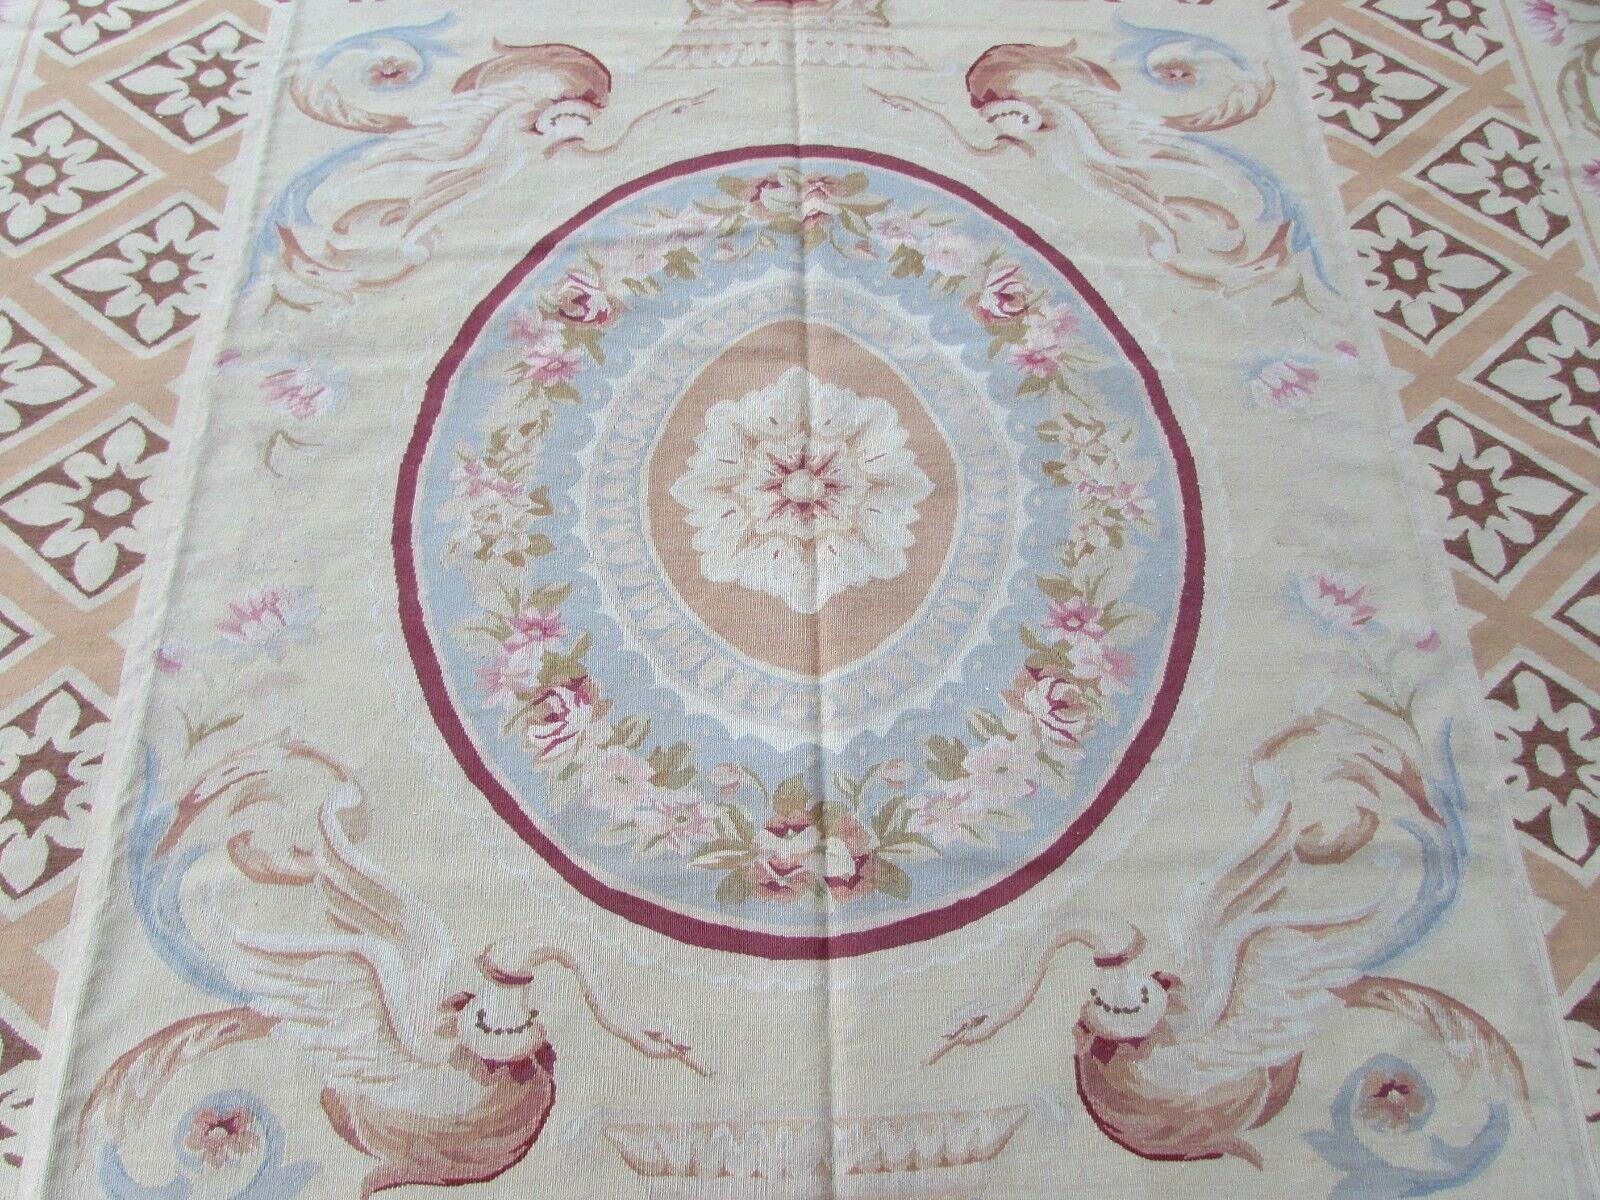 Handmade vintage French Aubusson rug made in wool. This rug has been made in the end of 20th century, it is in original good condition.

-condition: original good,

-circa 1980s,

-size: 8.4' x 10' (251cm x 300cm),

-material: